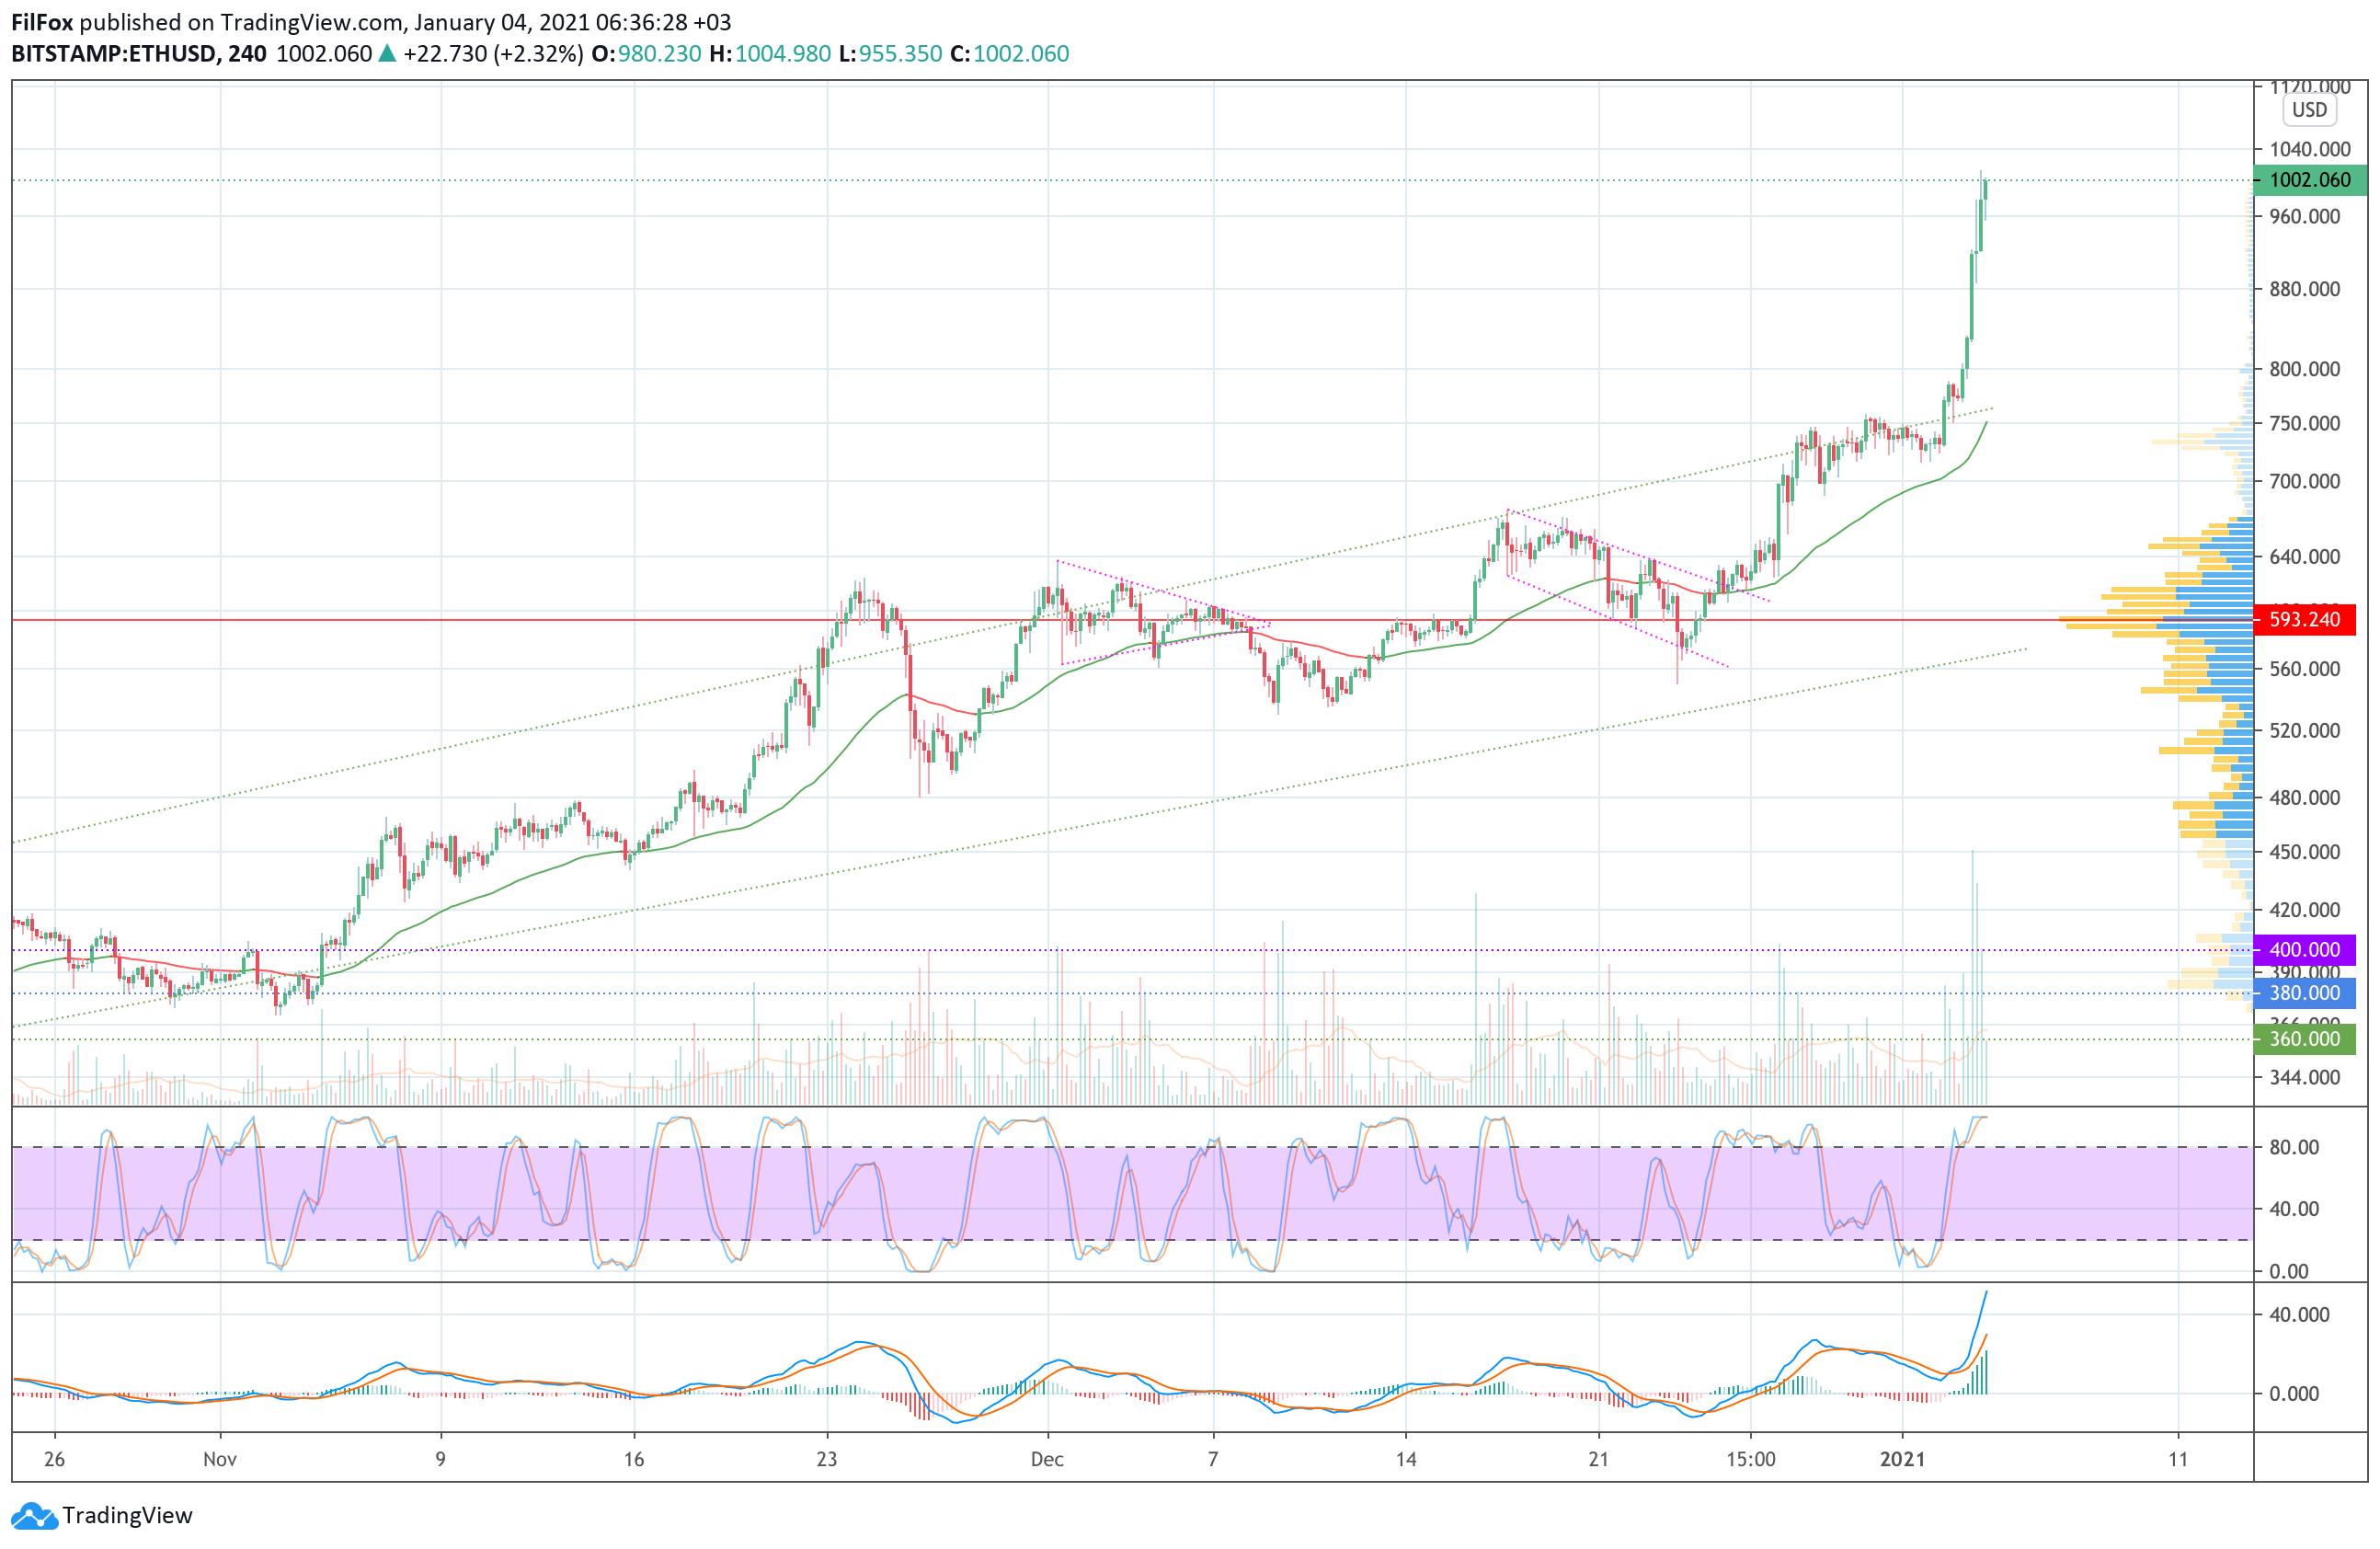 Analysis of prices for Bitcoin, Ethereum, Ripple for 01/04/2021